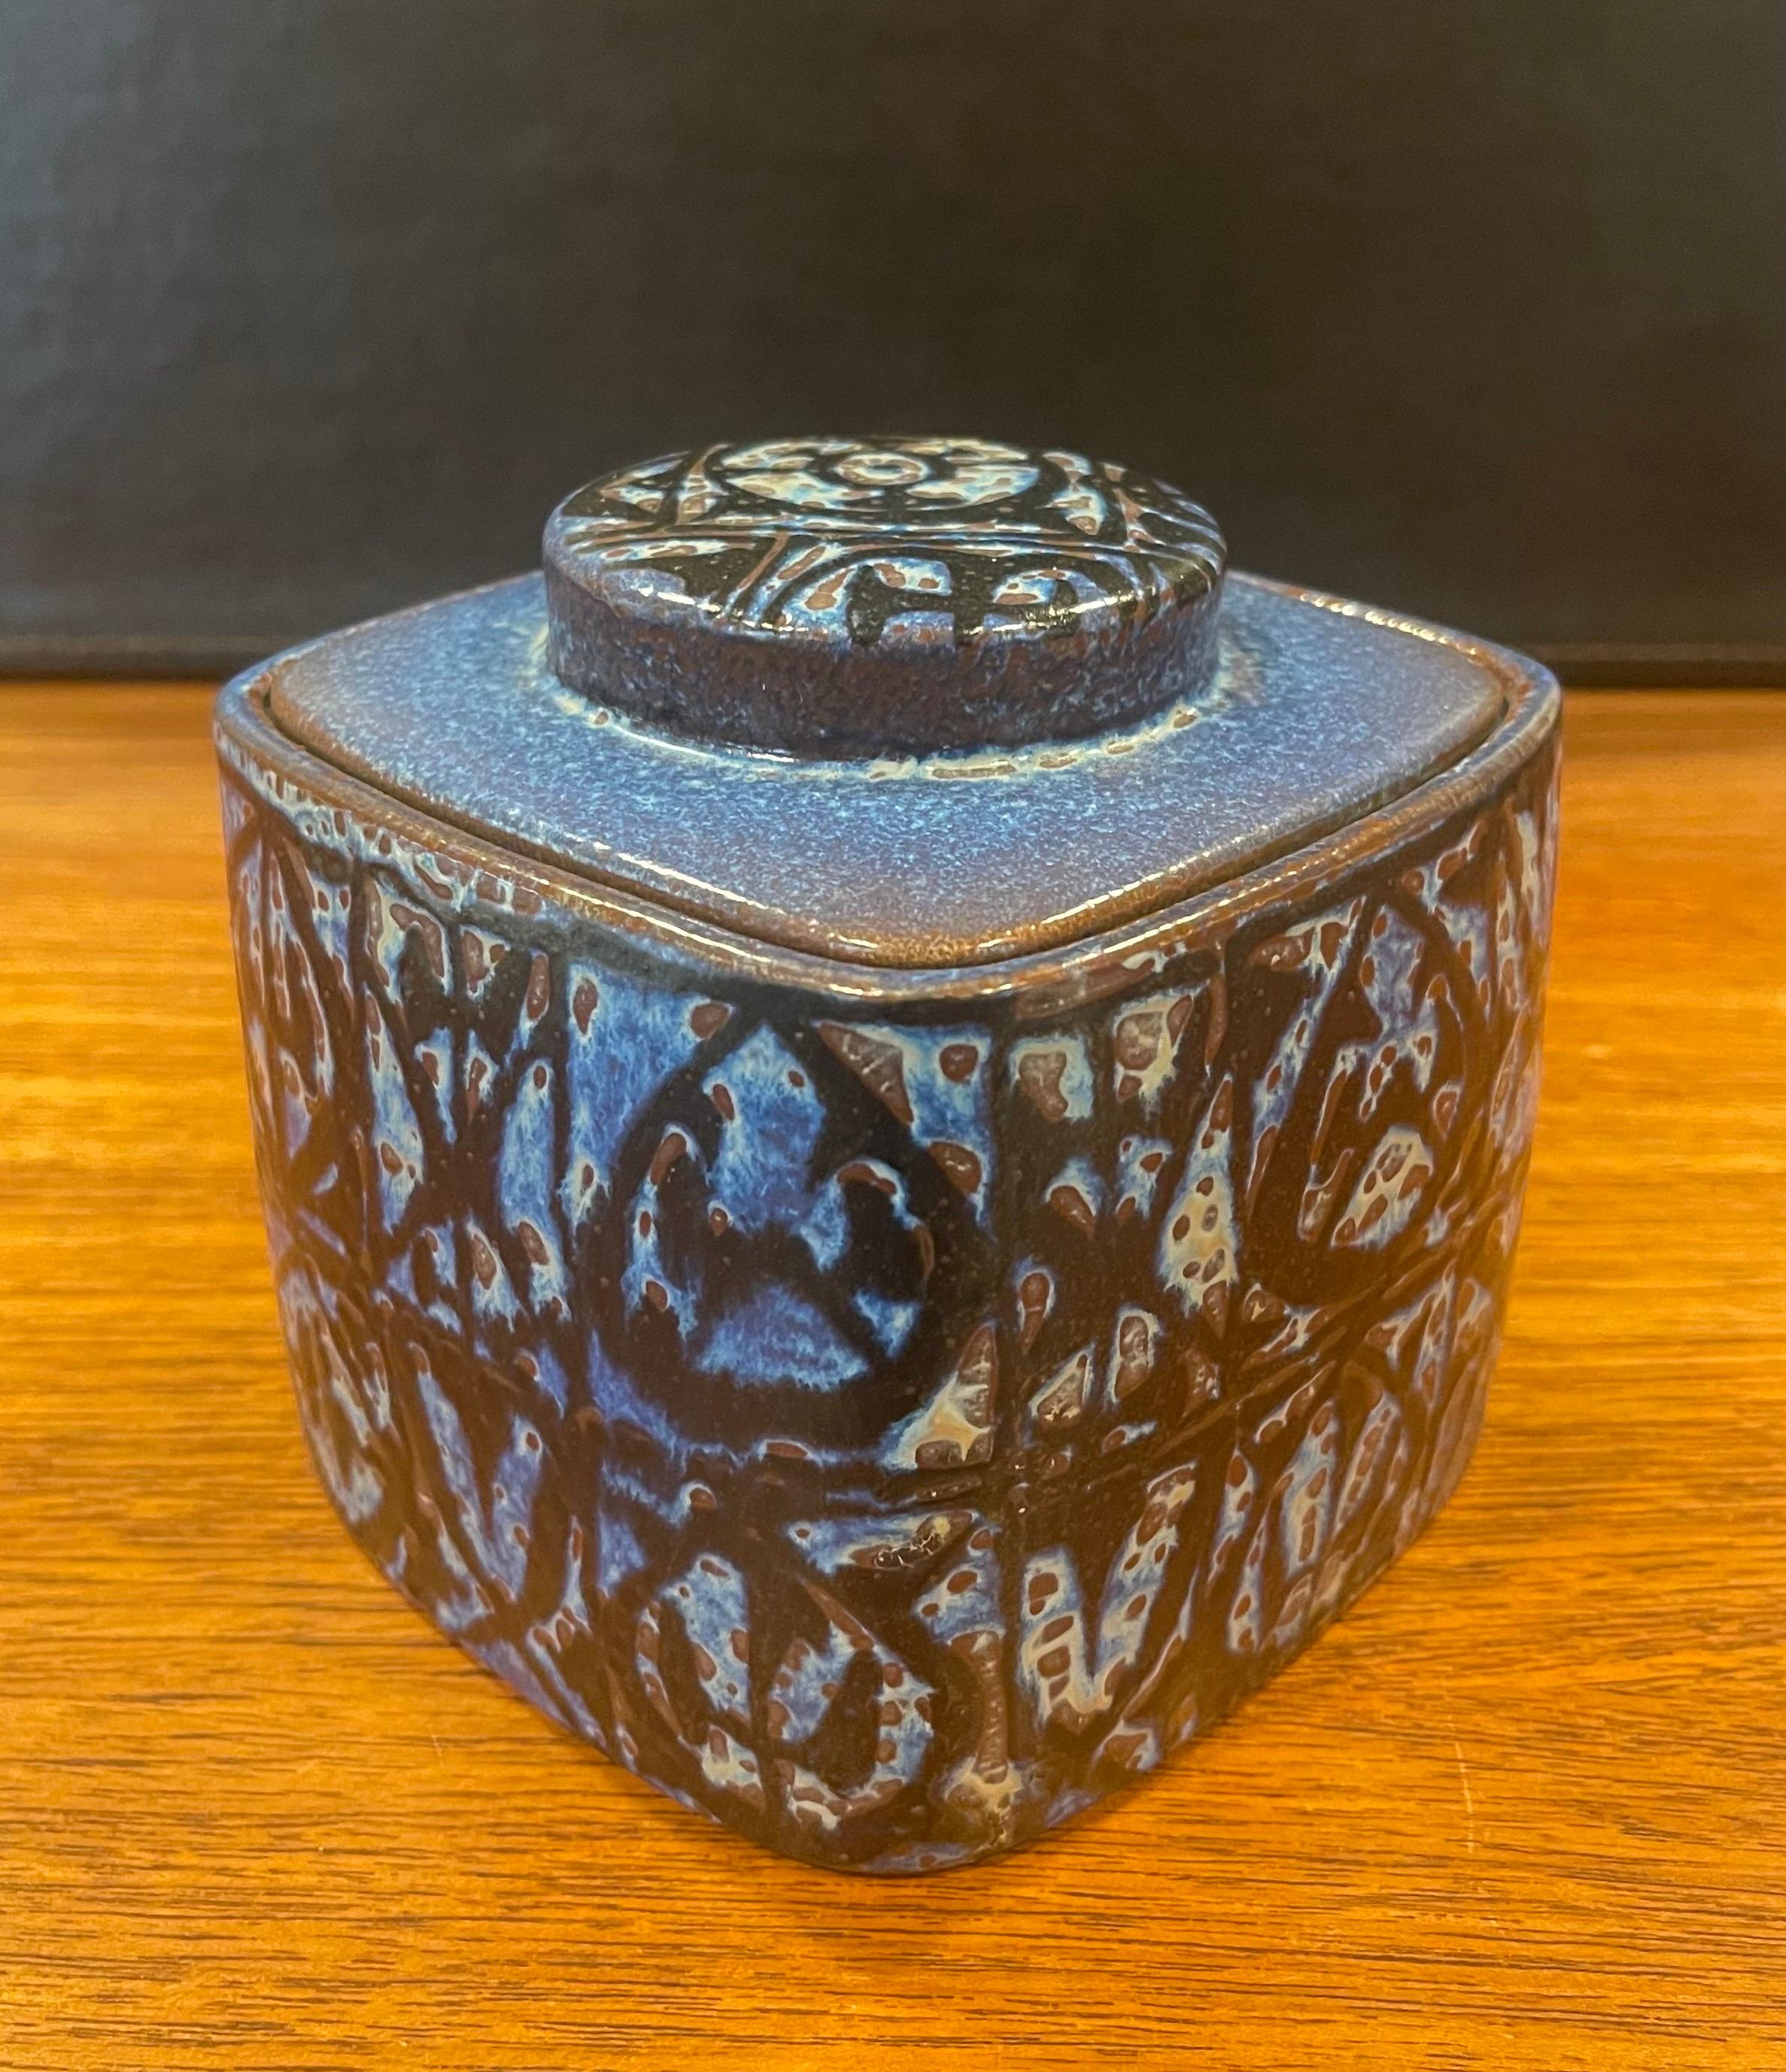 Wonderful Fajance lidded box / humidor from the Baca line by Nils Thorsson for Royal Copenhagen, circa 1960s. The stunning blue and black glazed stoneware container with geometric abstract design was designed by Royal Copenhagen's renowned artistic